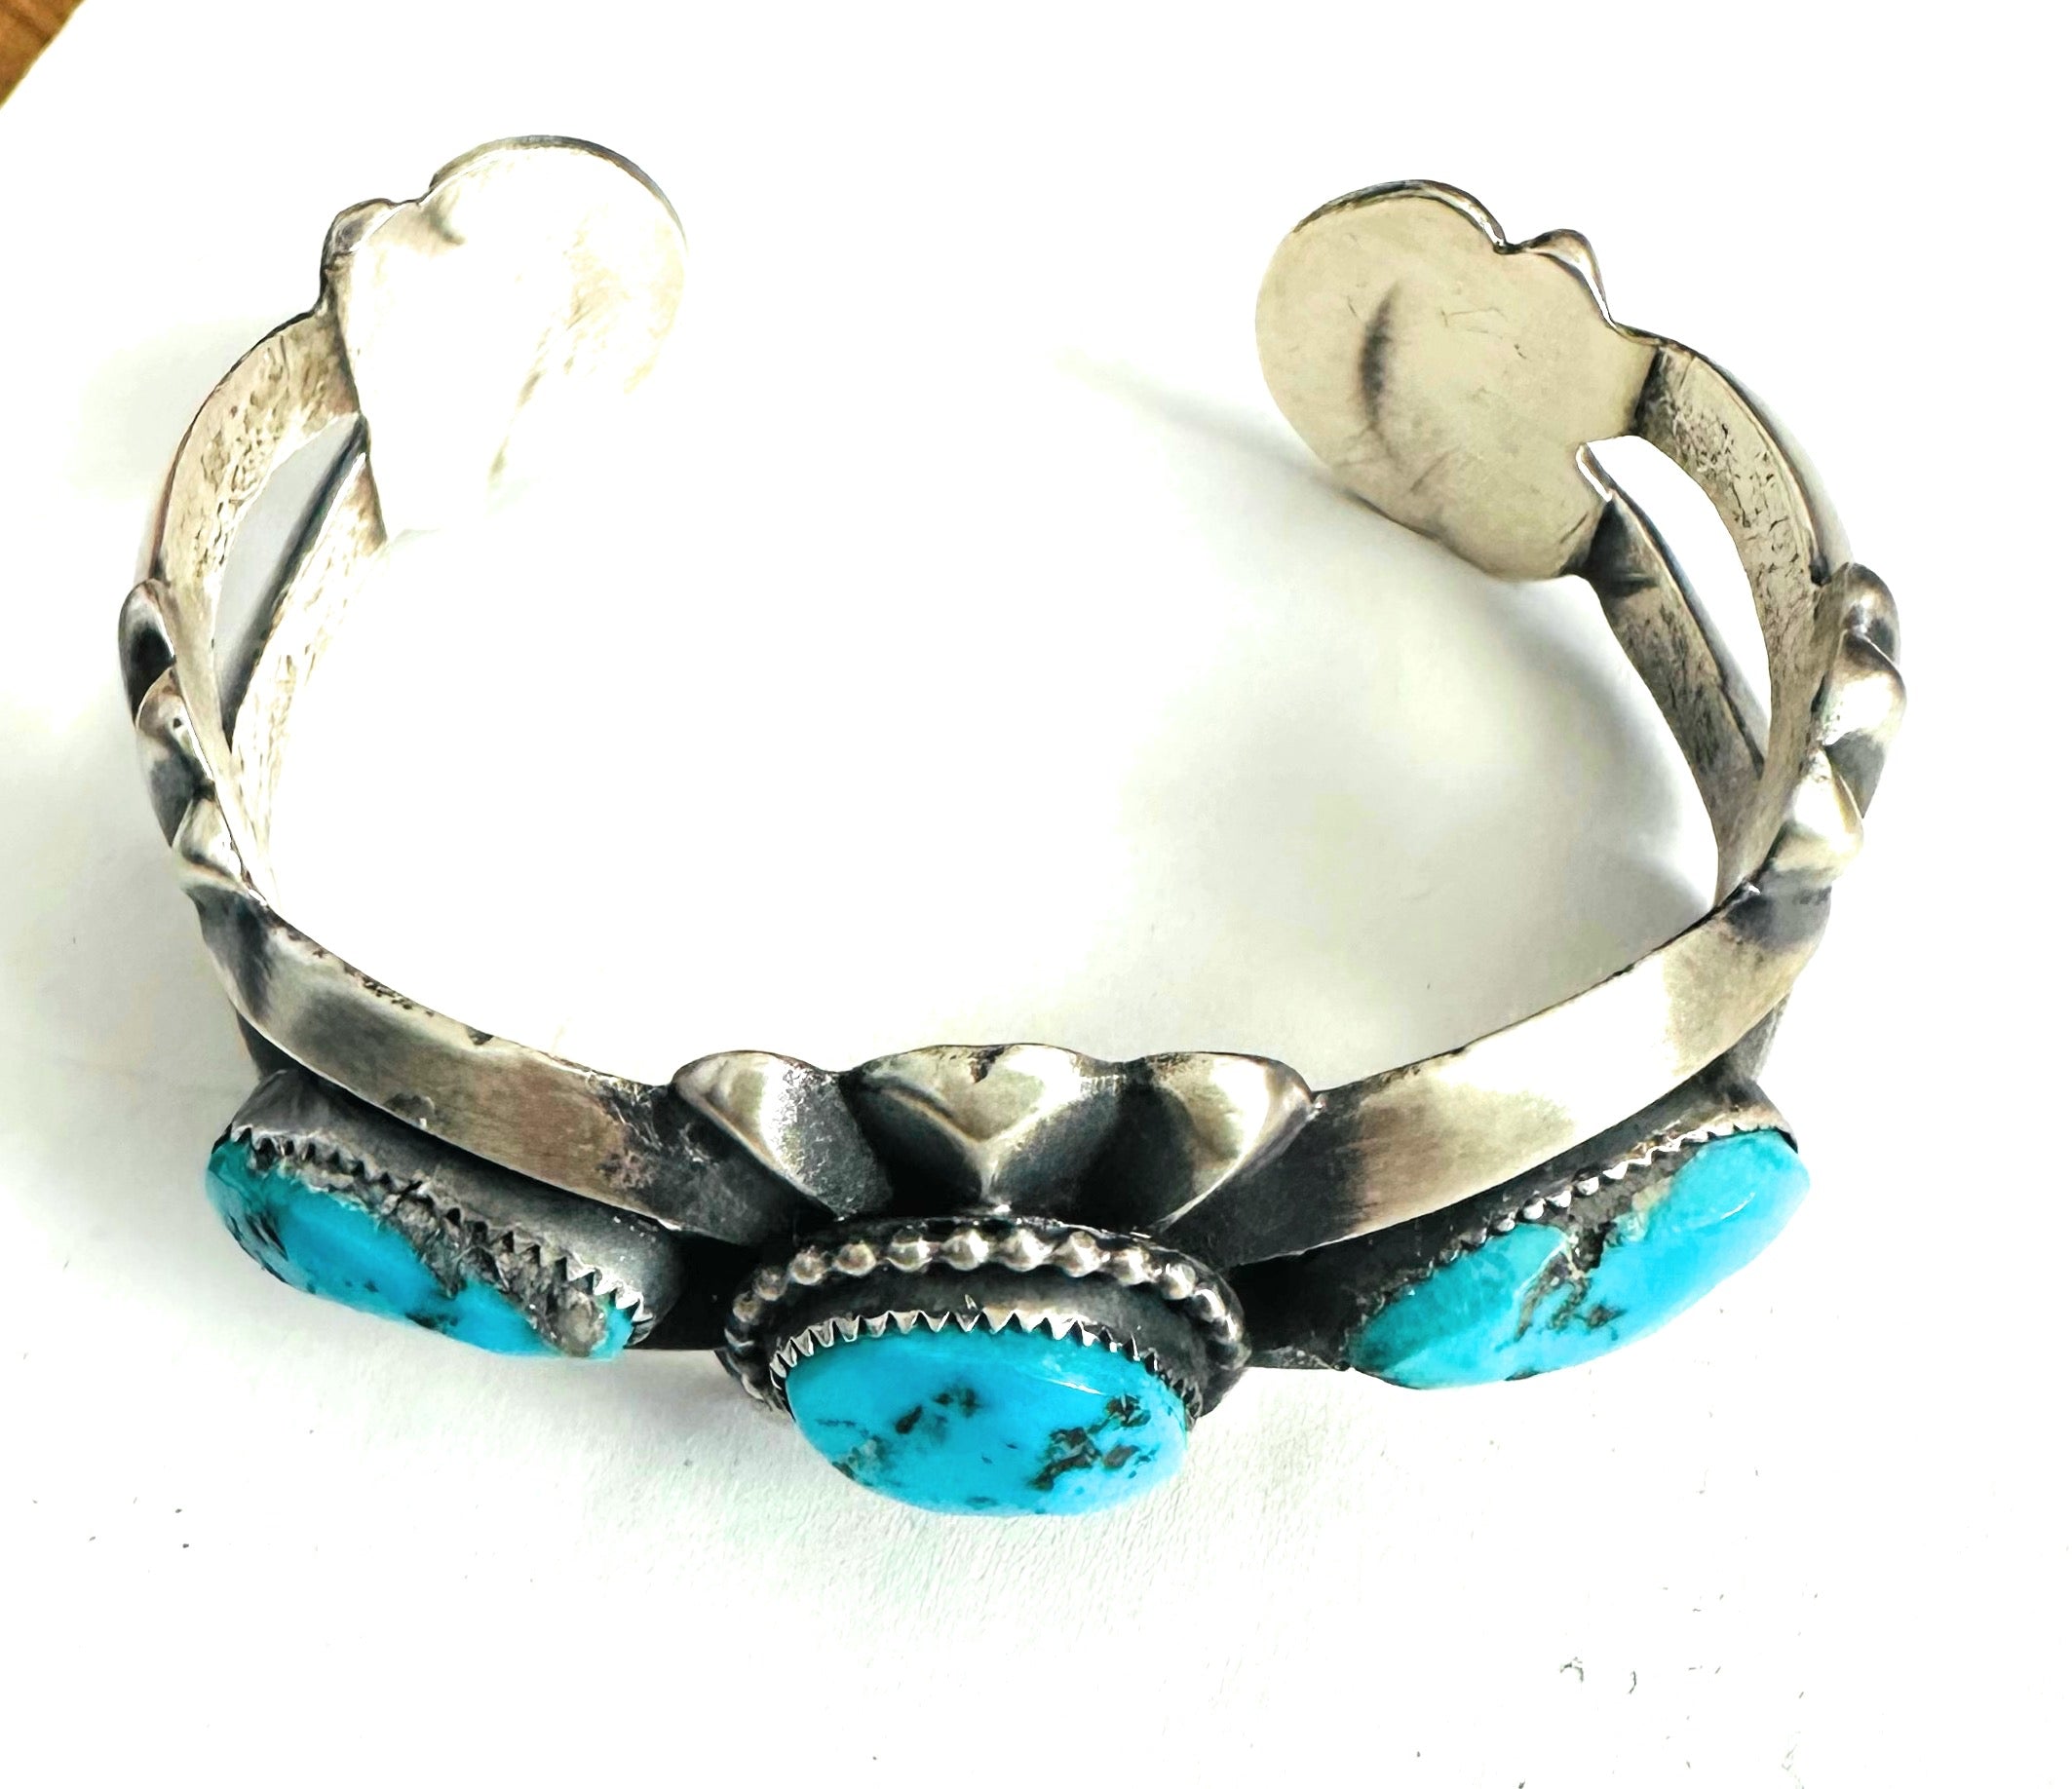 How to make a Sterling Silver Turquoise Cuff Bracelet from Start